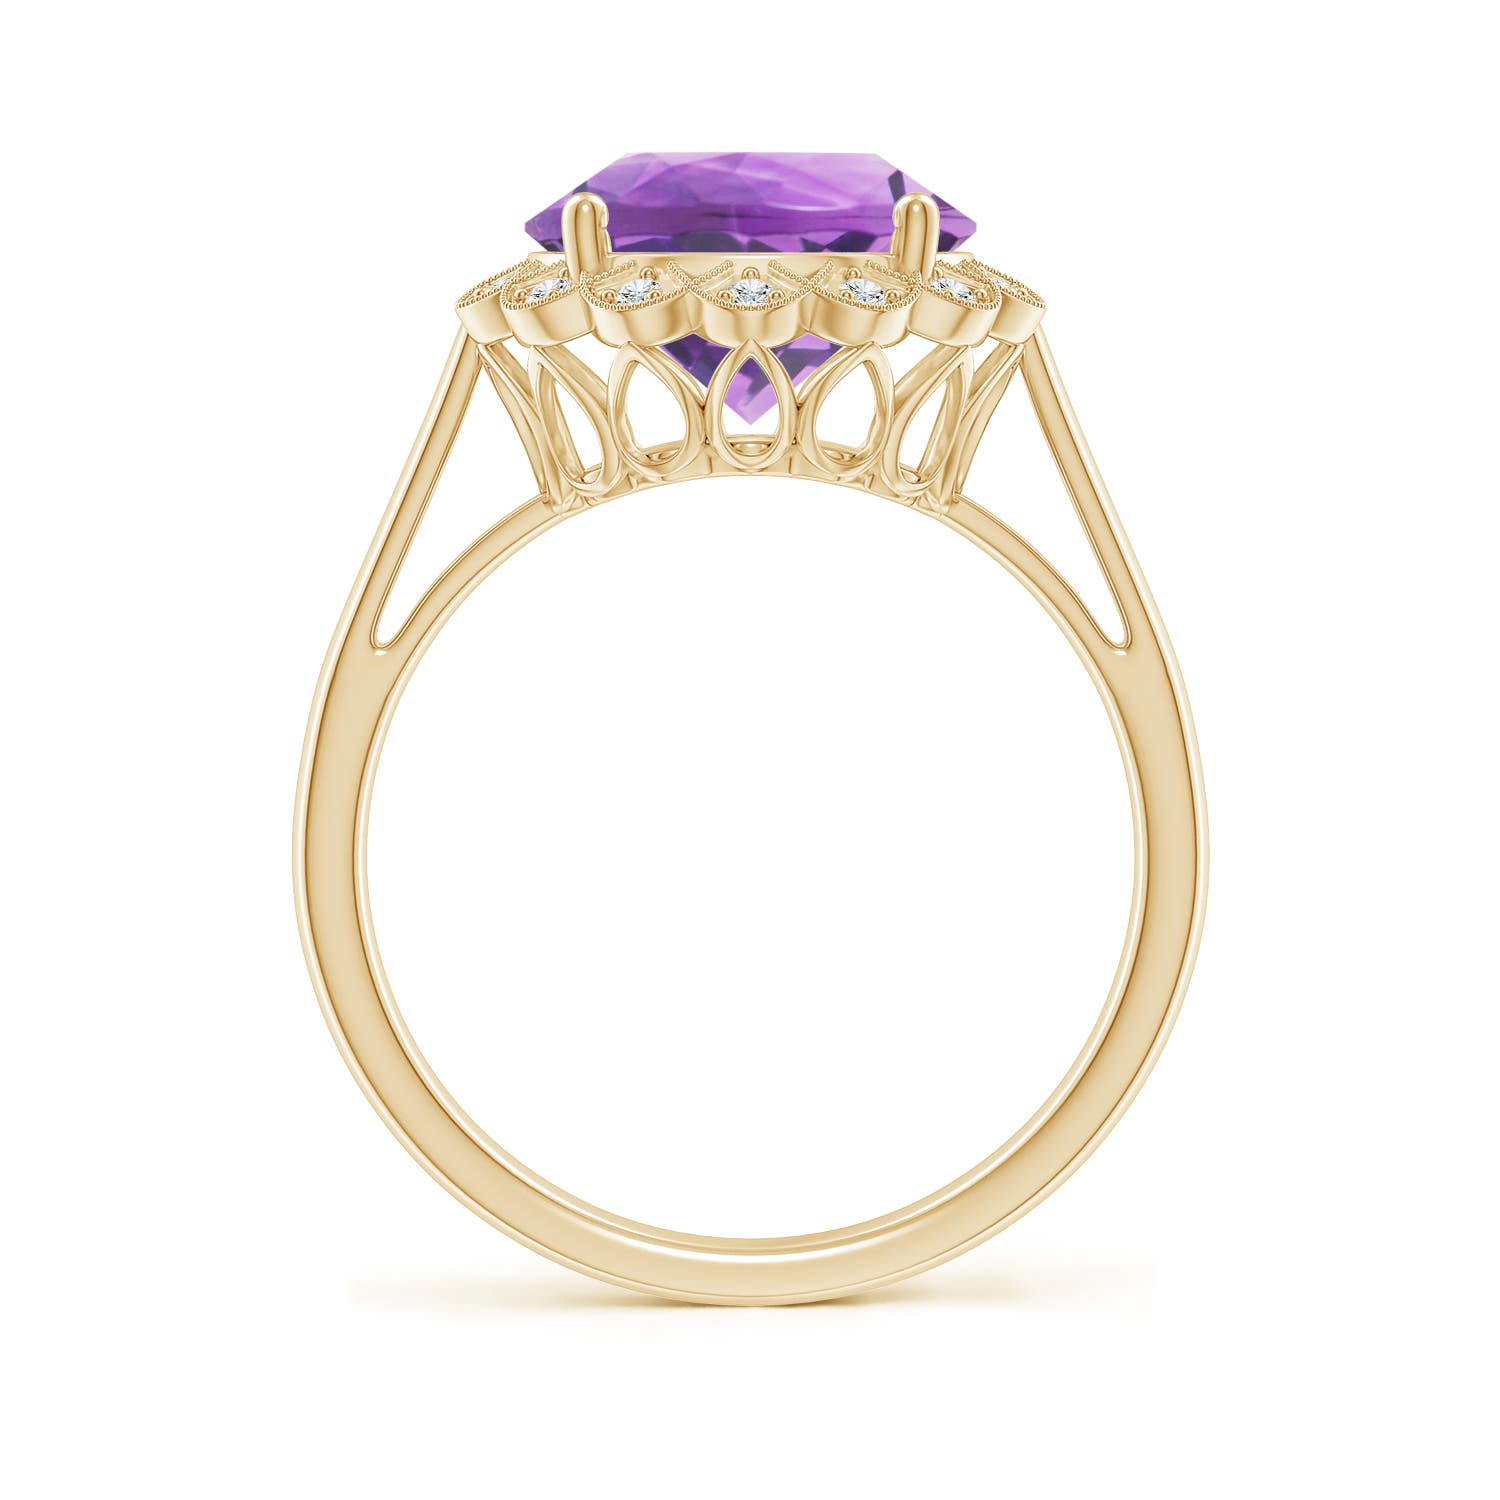 A - Amethyst / 3.28 CT / 14 KT Yellow Gold